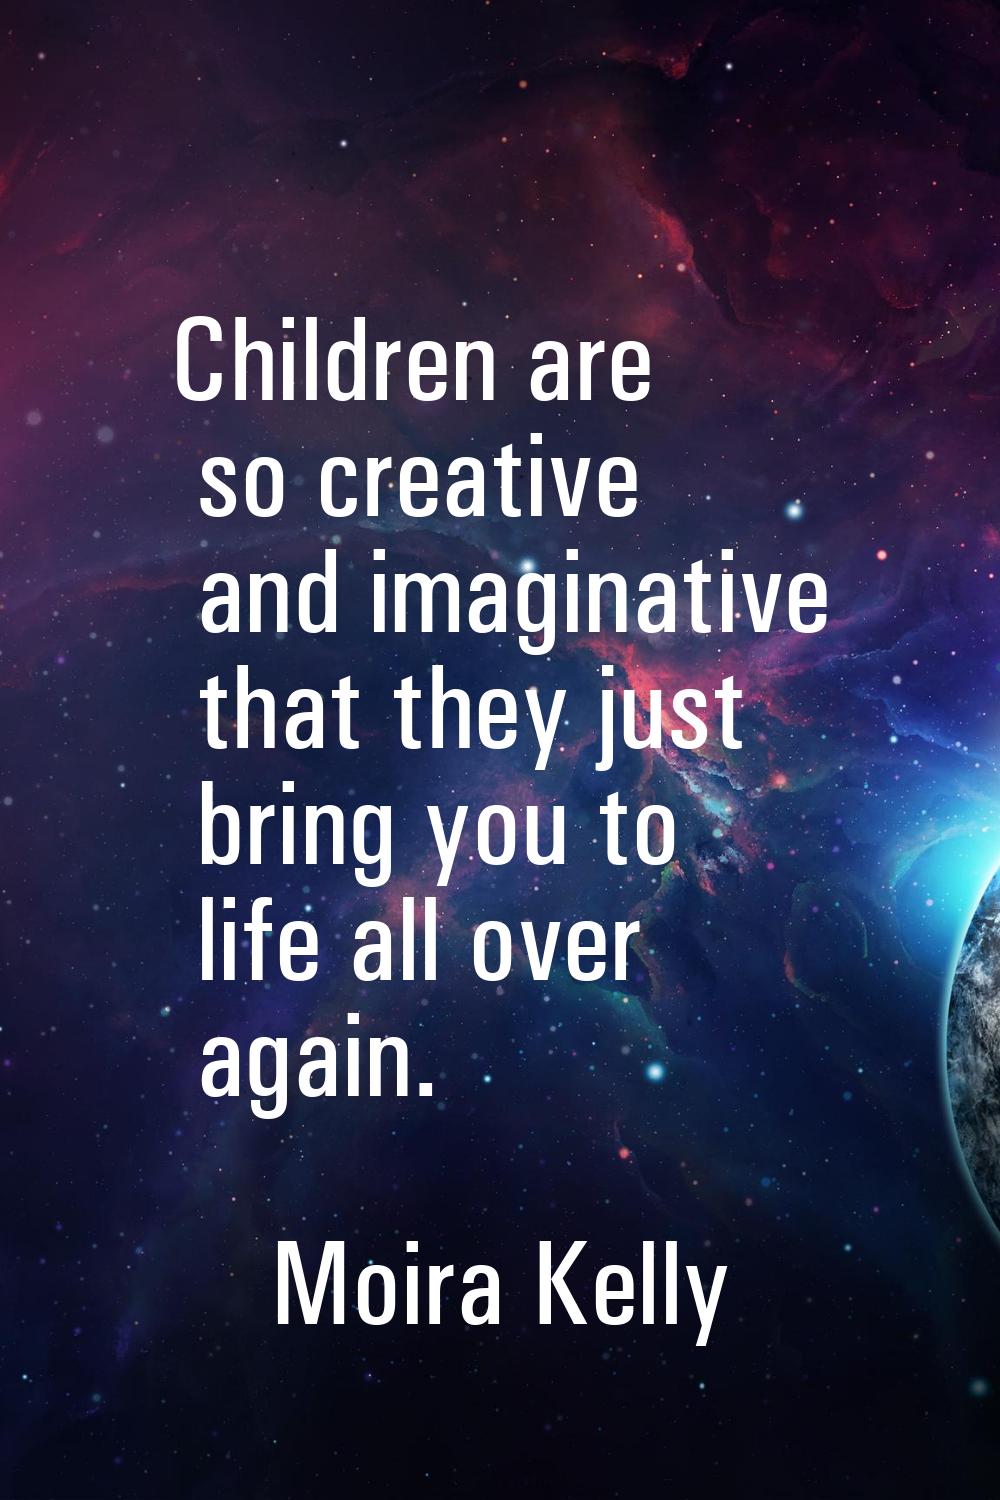 Children are so creative and imaginative that they just bring you to life all over again.